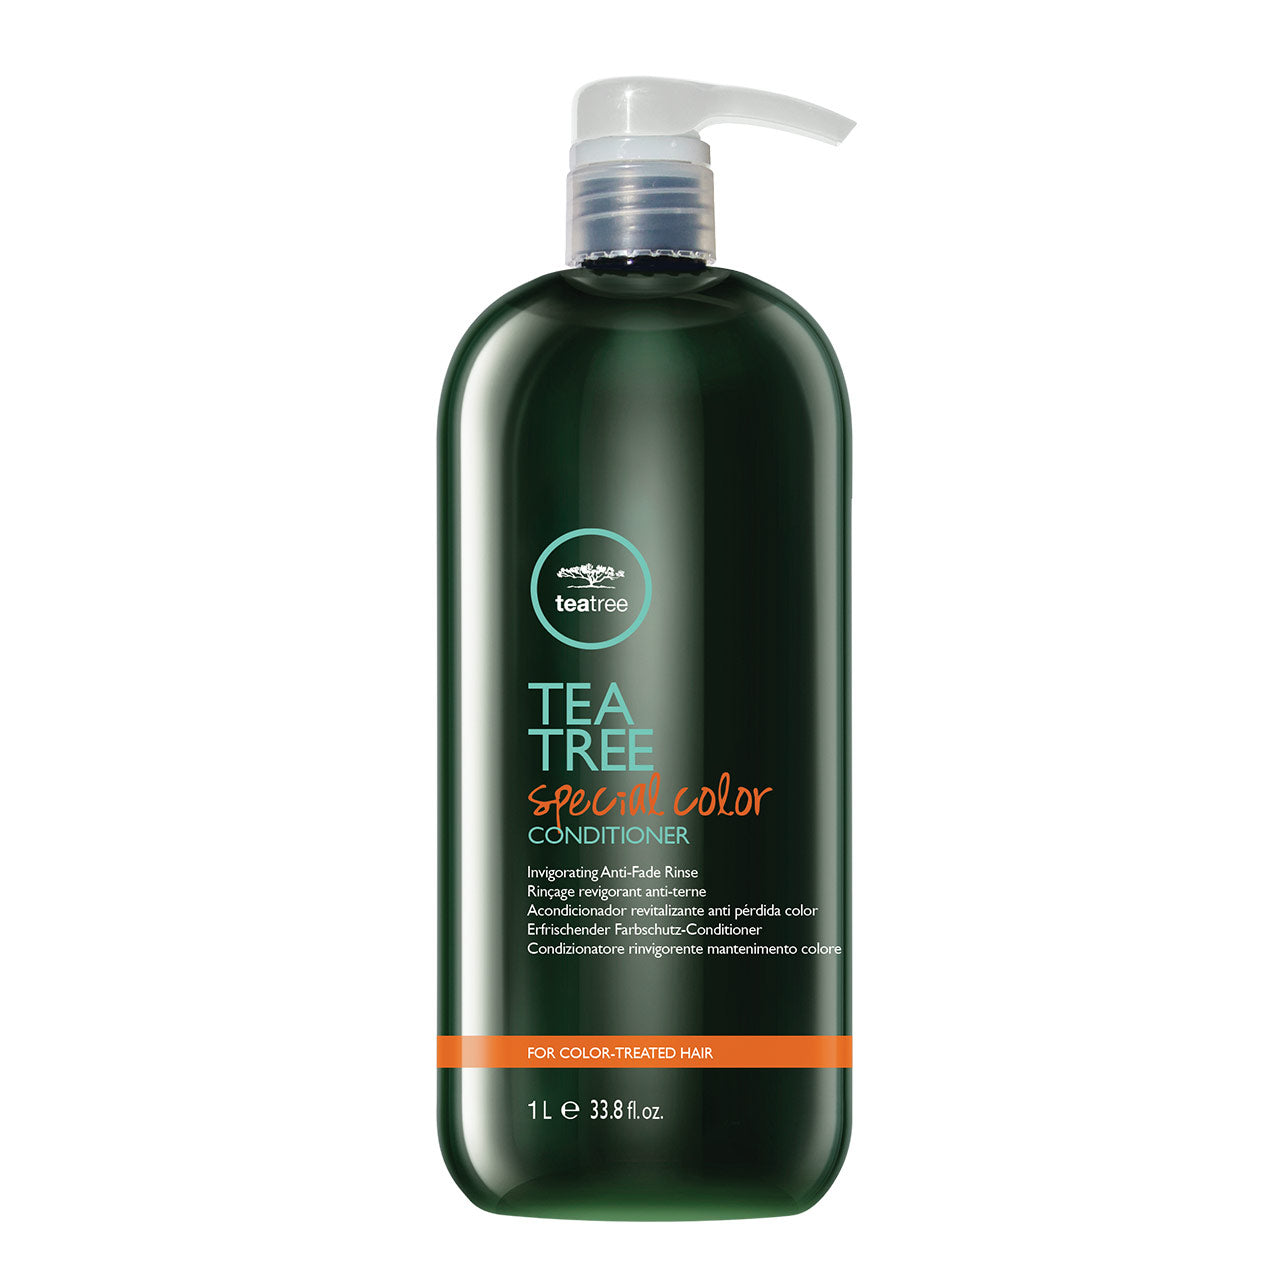 Tea Tree Special Color Conditioner - 1L - by Paul Mitchell |ProCare Outlet|